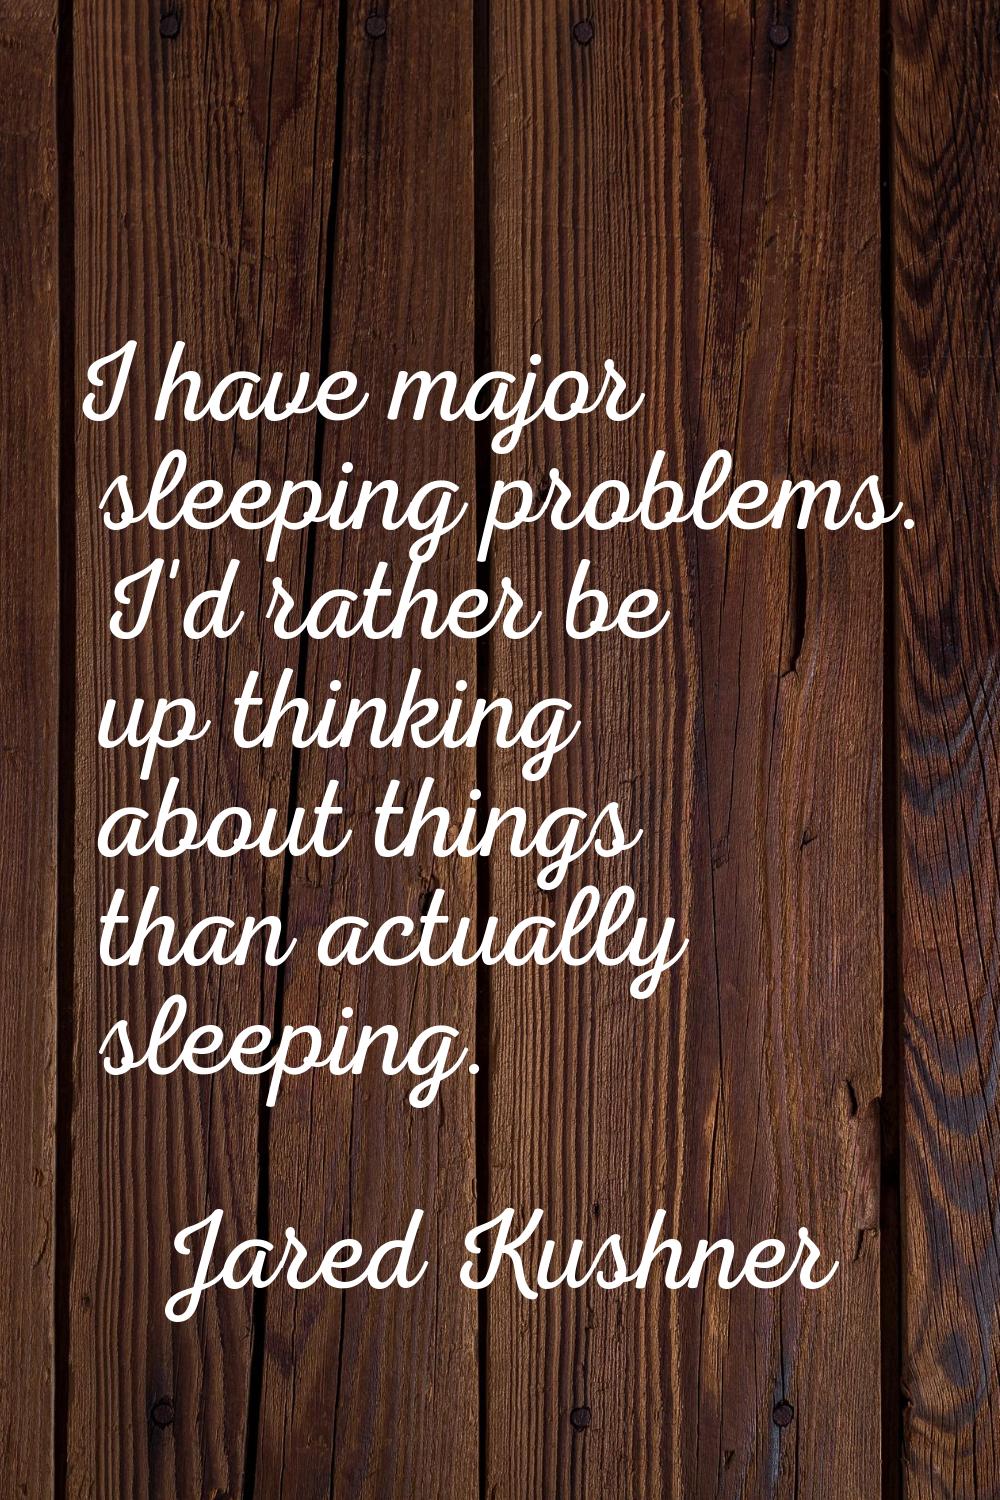 I have major sleeping problems. I'd rather be up thinking about things than actually sleeping.